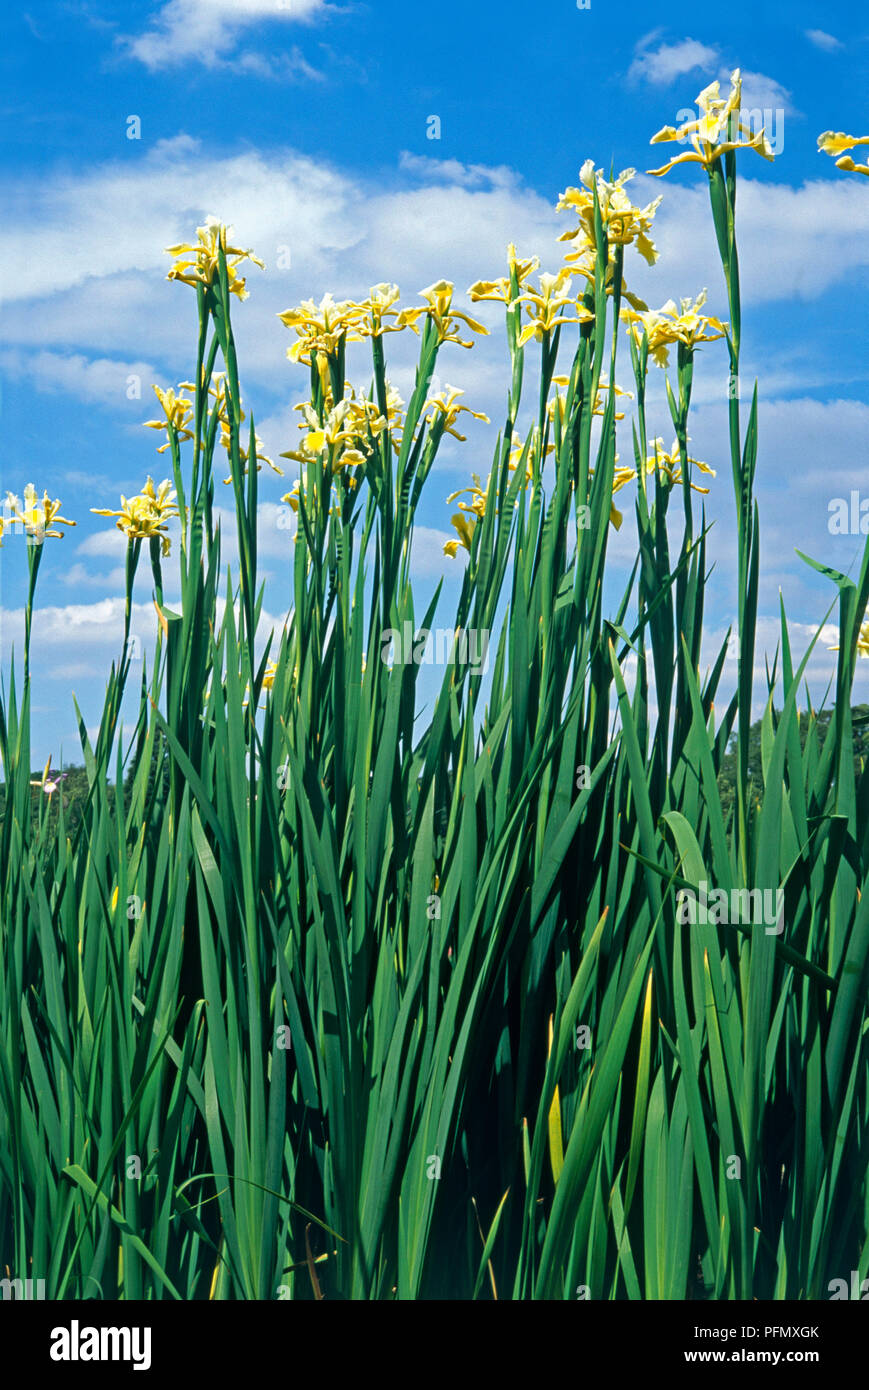 Iris 'Shelford Giant' (Spuria) with yellow flowers and green leaves on tall stems set against blue sky Stock Photo